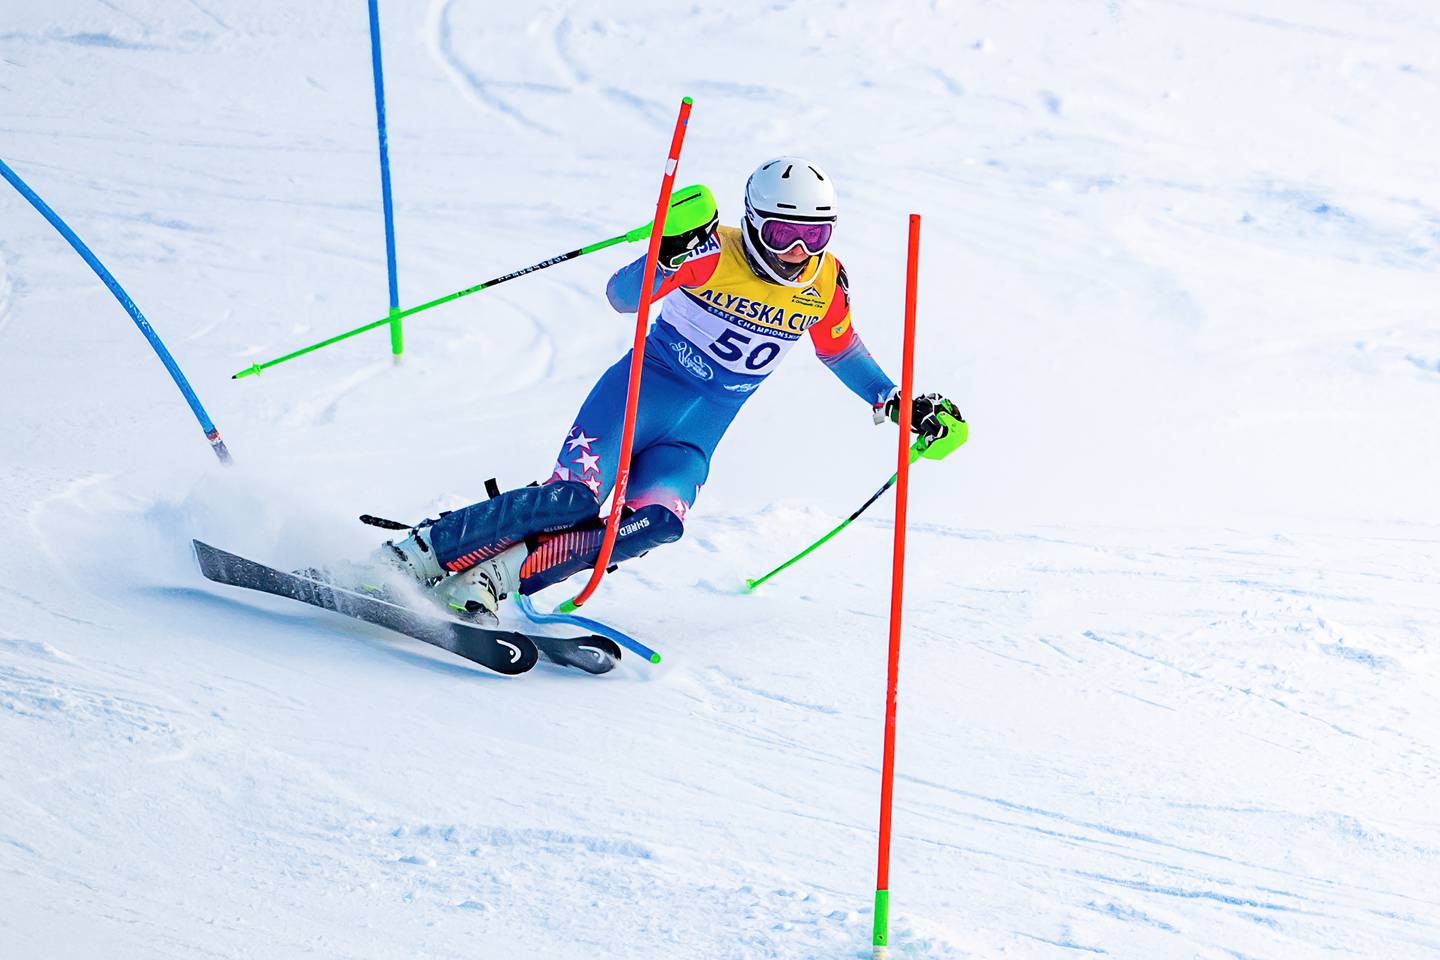 Finnigan Donley adopts a narrow -- and risky -- stance and rides on the outside edge of his inside ski to straighten out a hairpin during slalom racing Sunday on the Tanaka Hill at Alyeska Resort. The maneuver helped contribute to a winning margin of about seven seconds. (Photo by Bob Eastaugh)